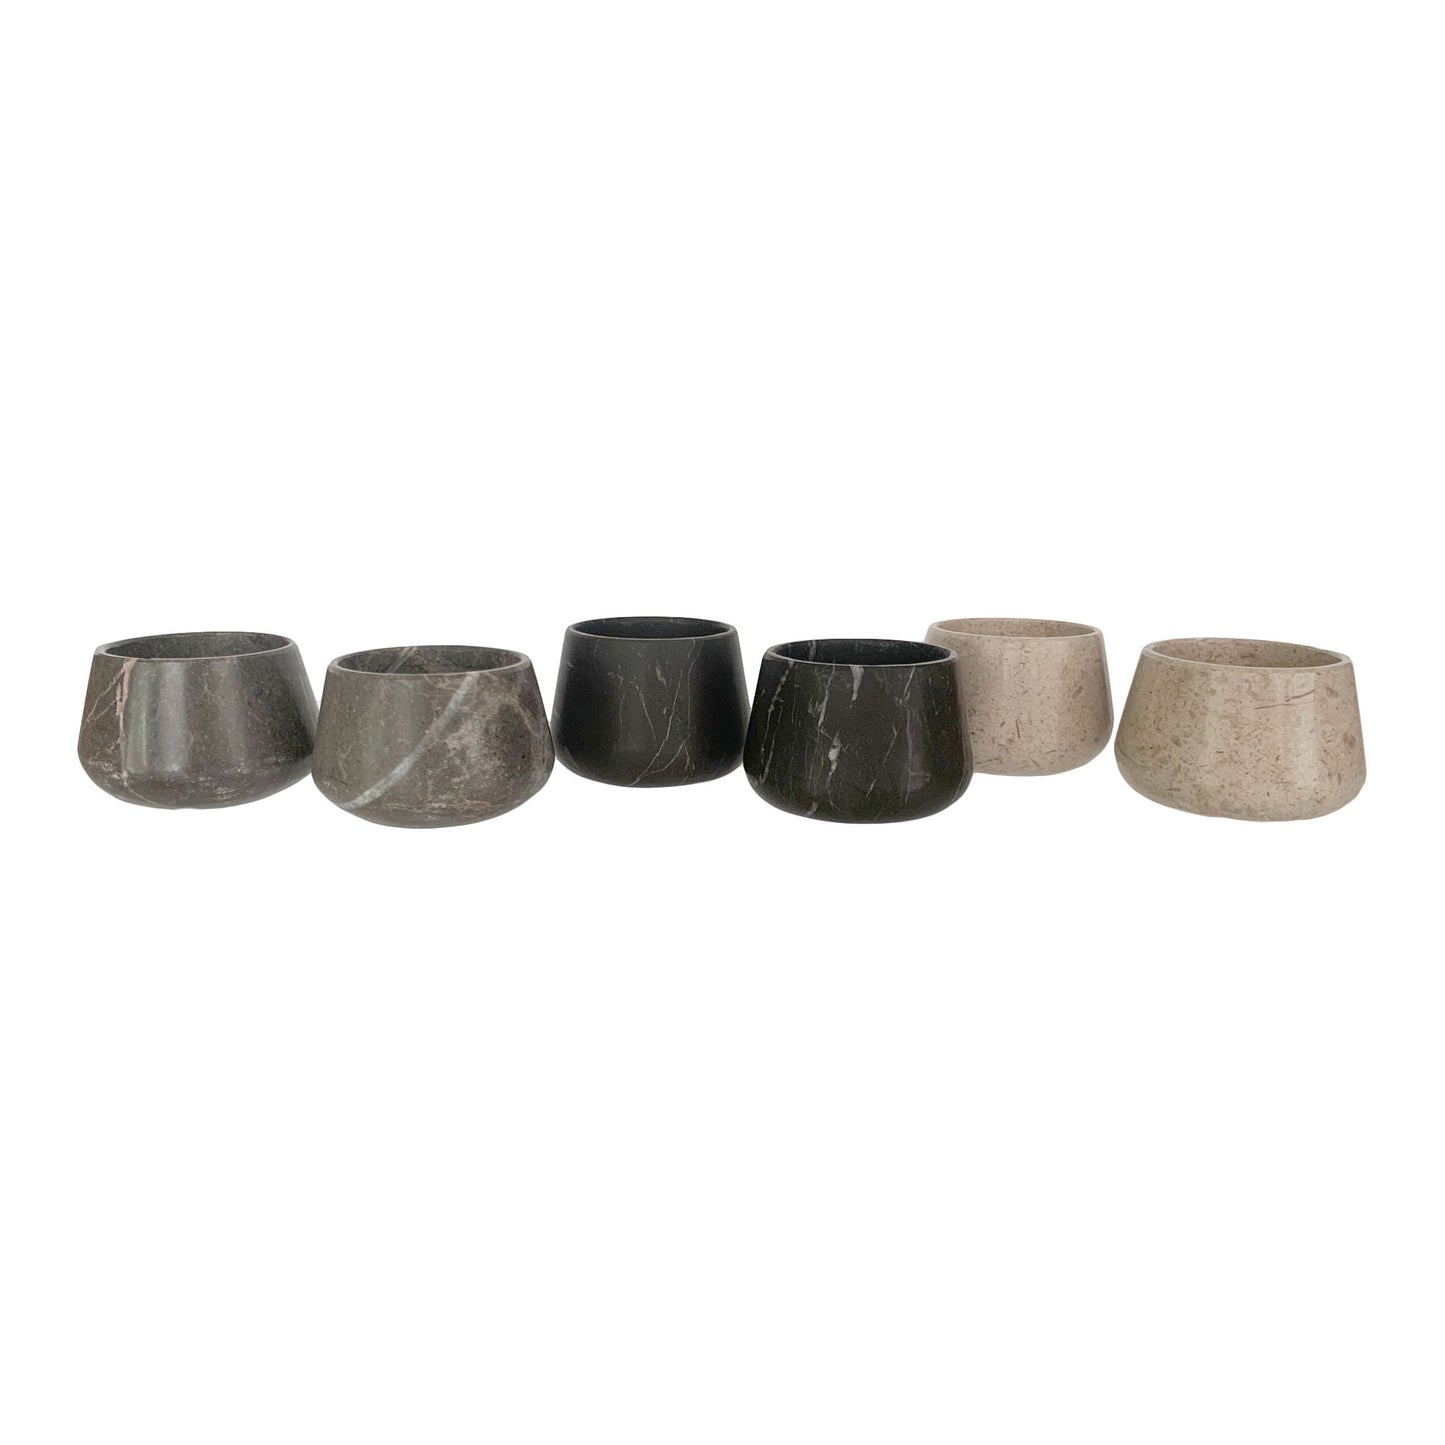 Marble Mezcal Copitas with Wooden Base | Stone Shot Glasses Set | Shot Flight Tray - Handmade in Mexico (Available with Black, Gray or Beige Marble Cups)